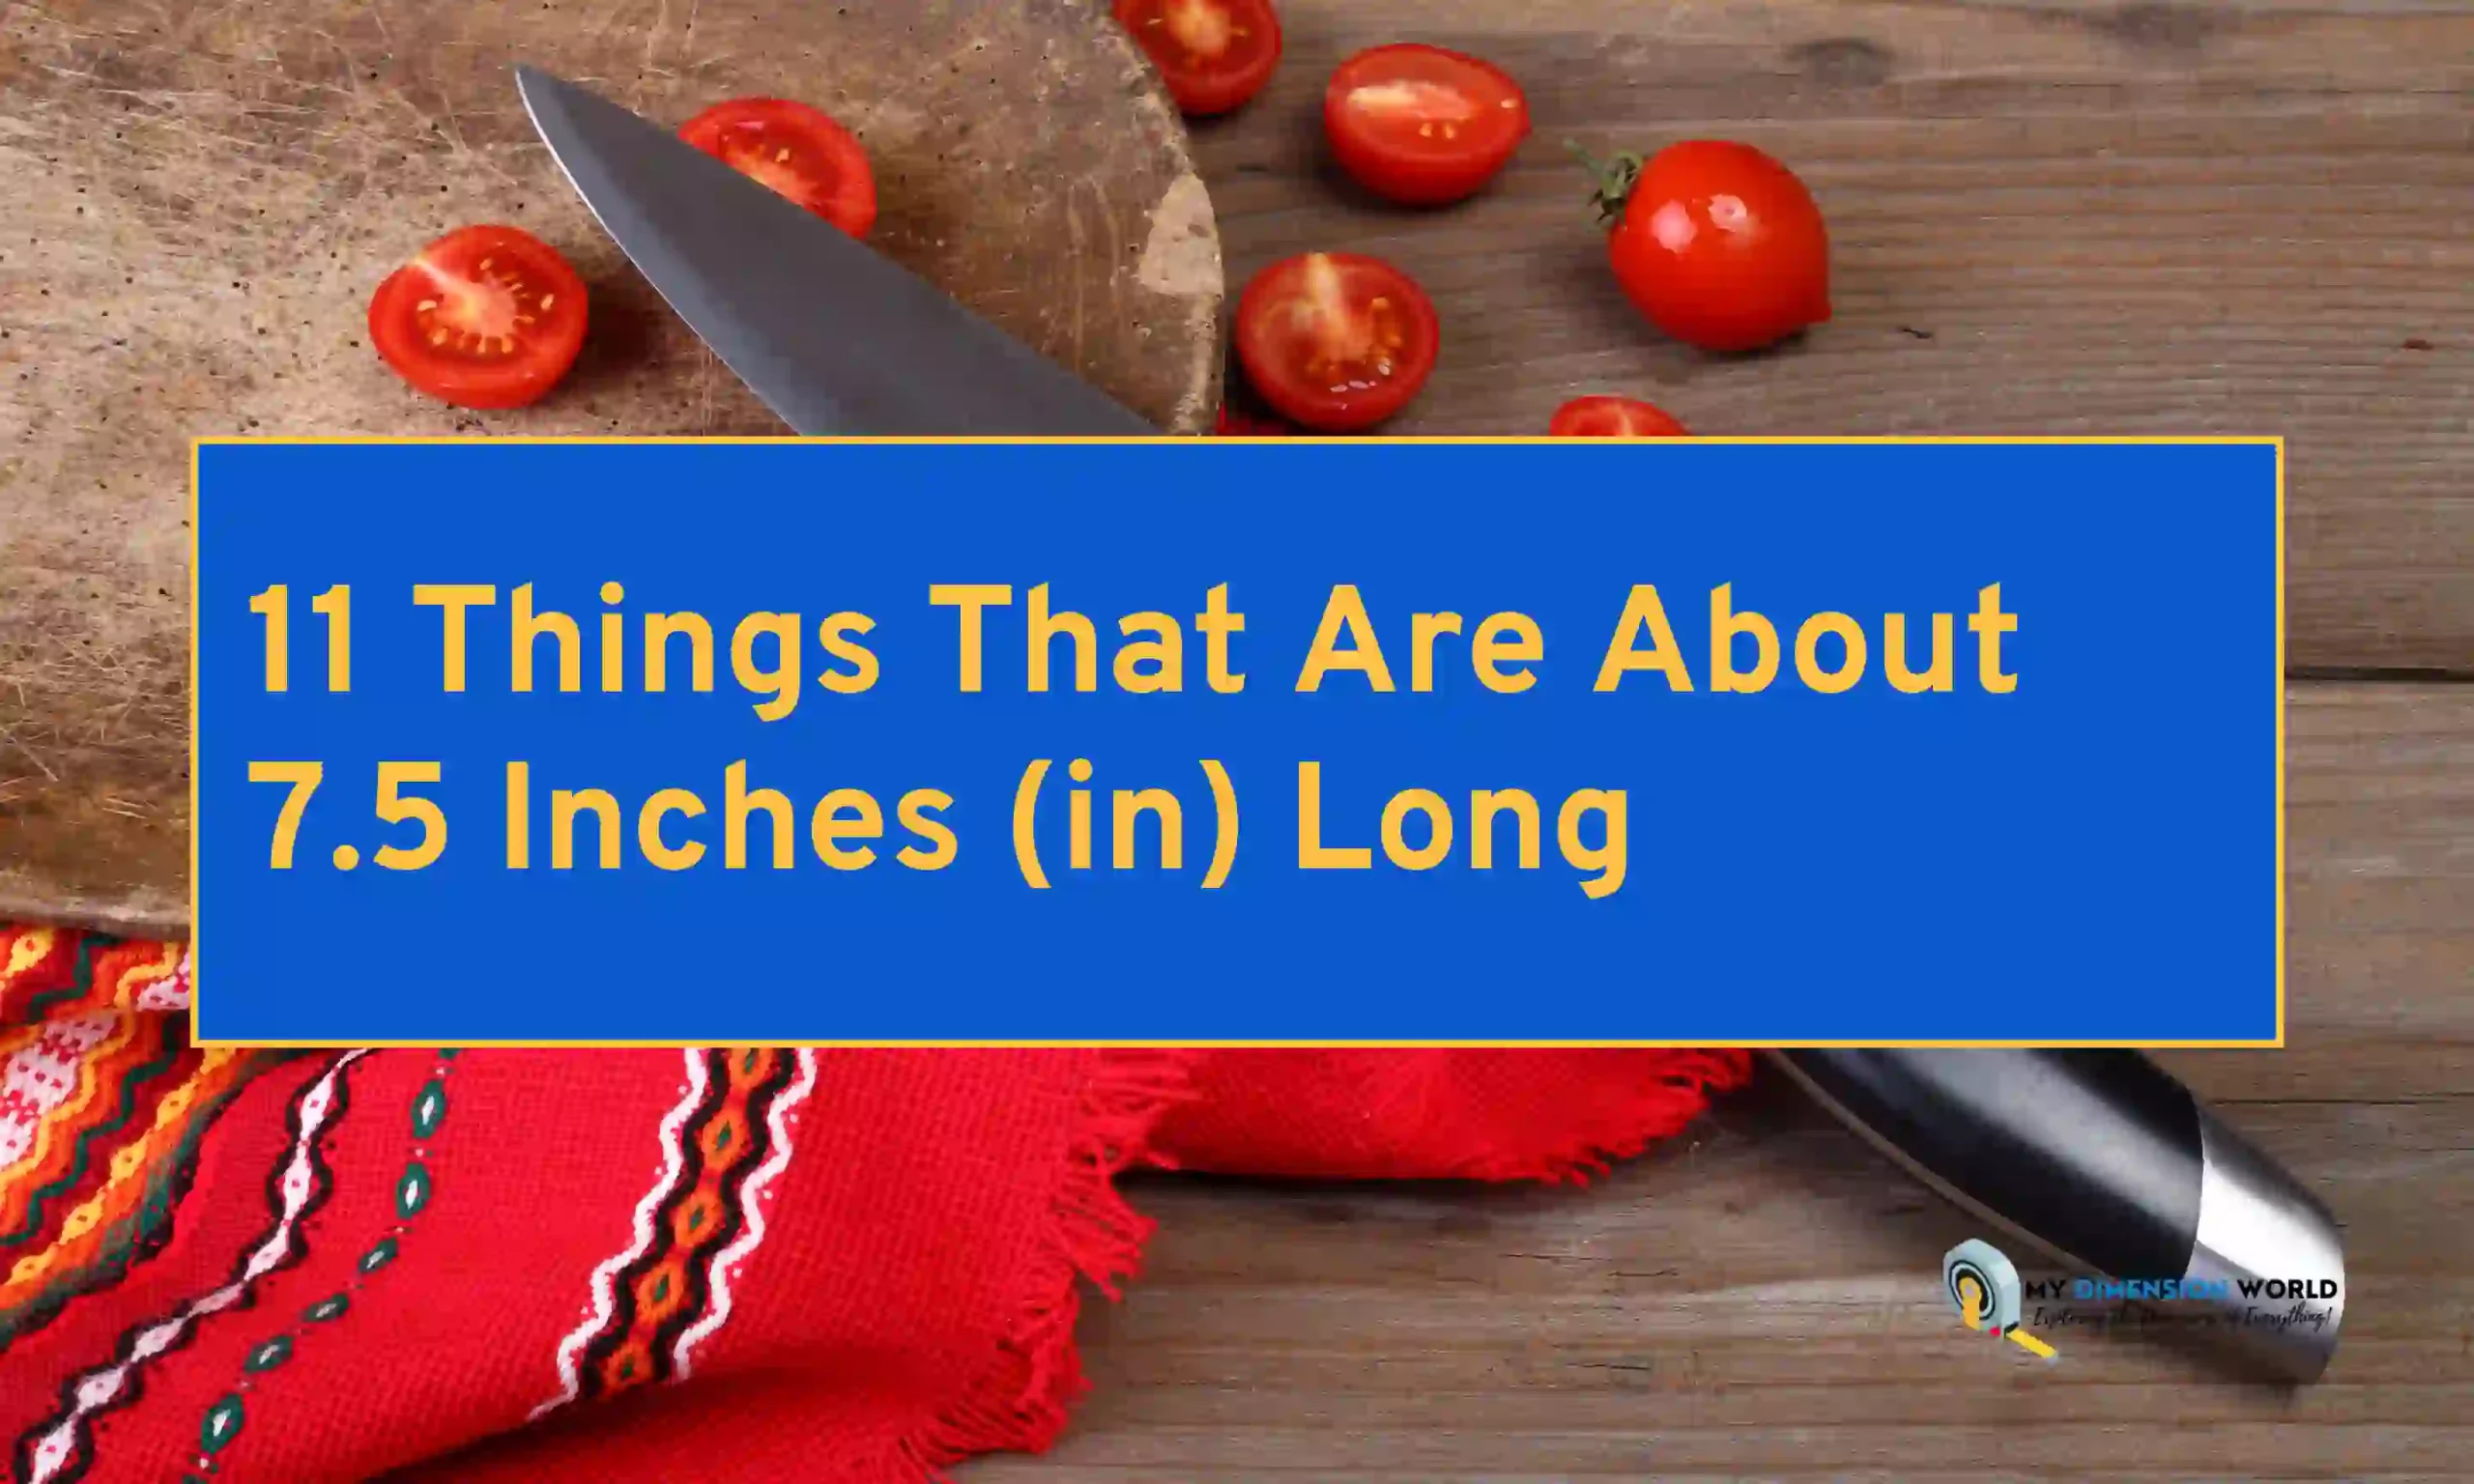 11 Things That Are About 7.5 Inches (in) Long